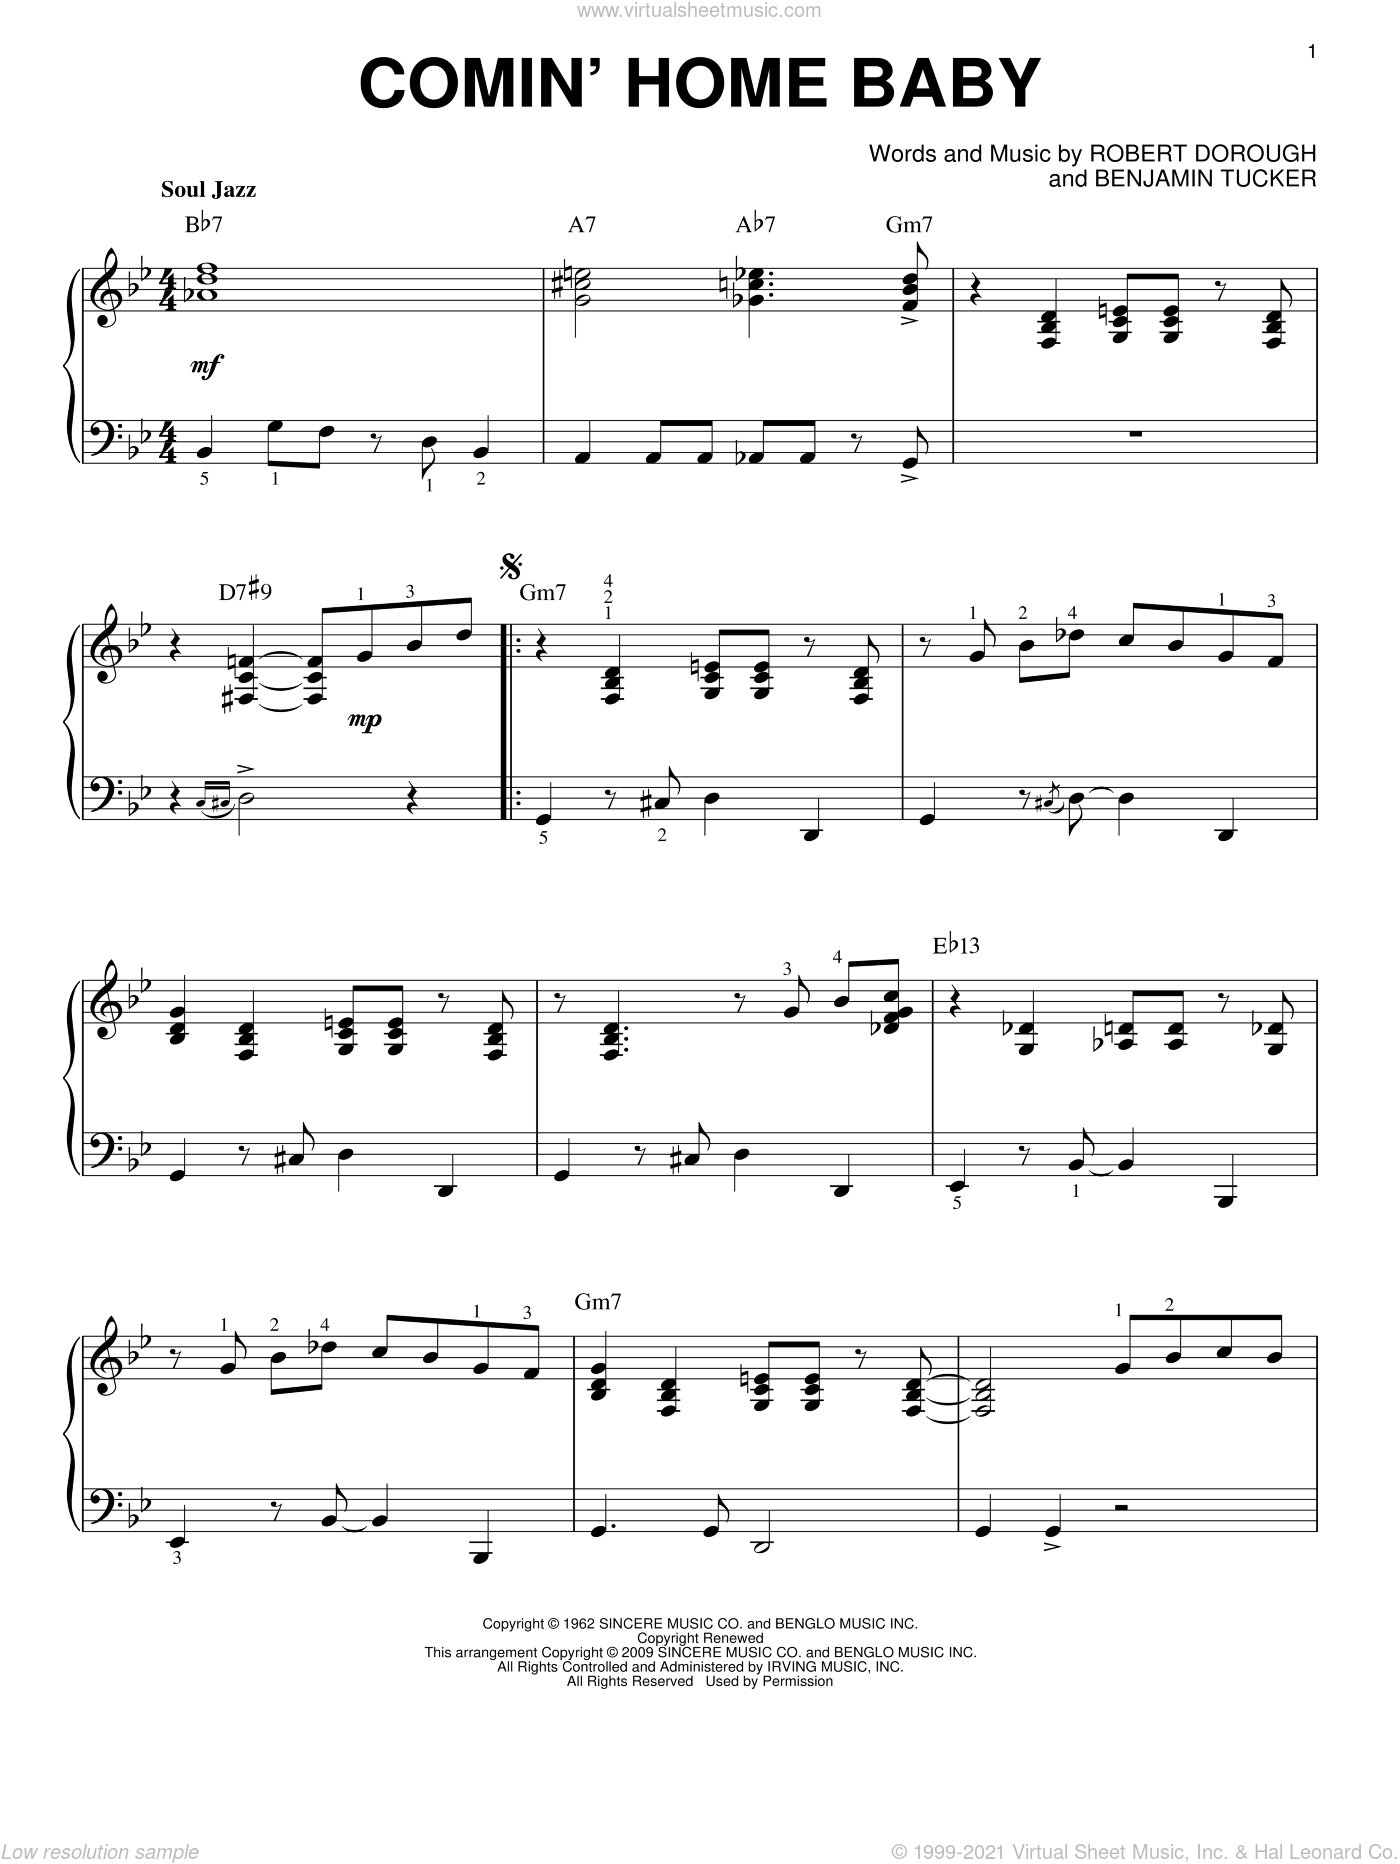 Comin' Home Baby [Jazz version] sheet music for piano solo (PDF)